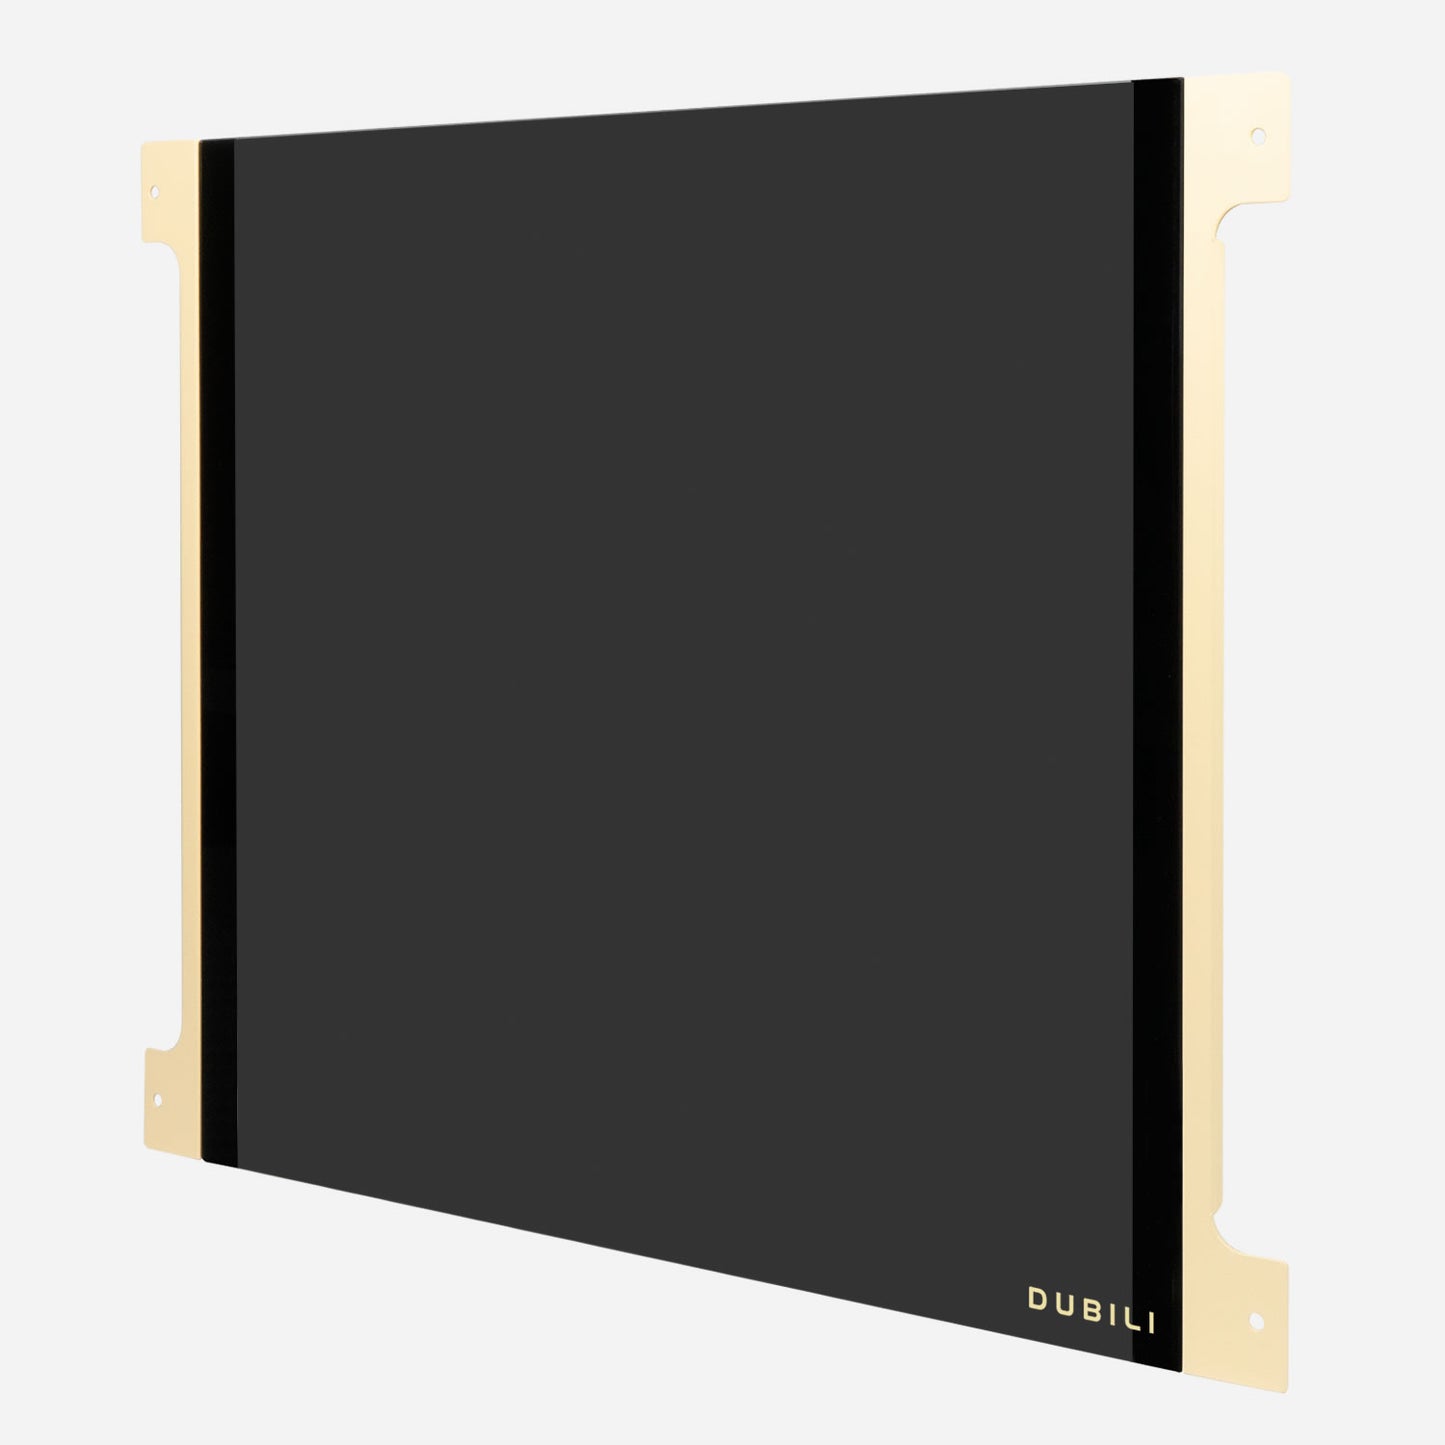 P- DUBILI Champagne Gold Tempered Glass Side Panel